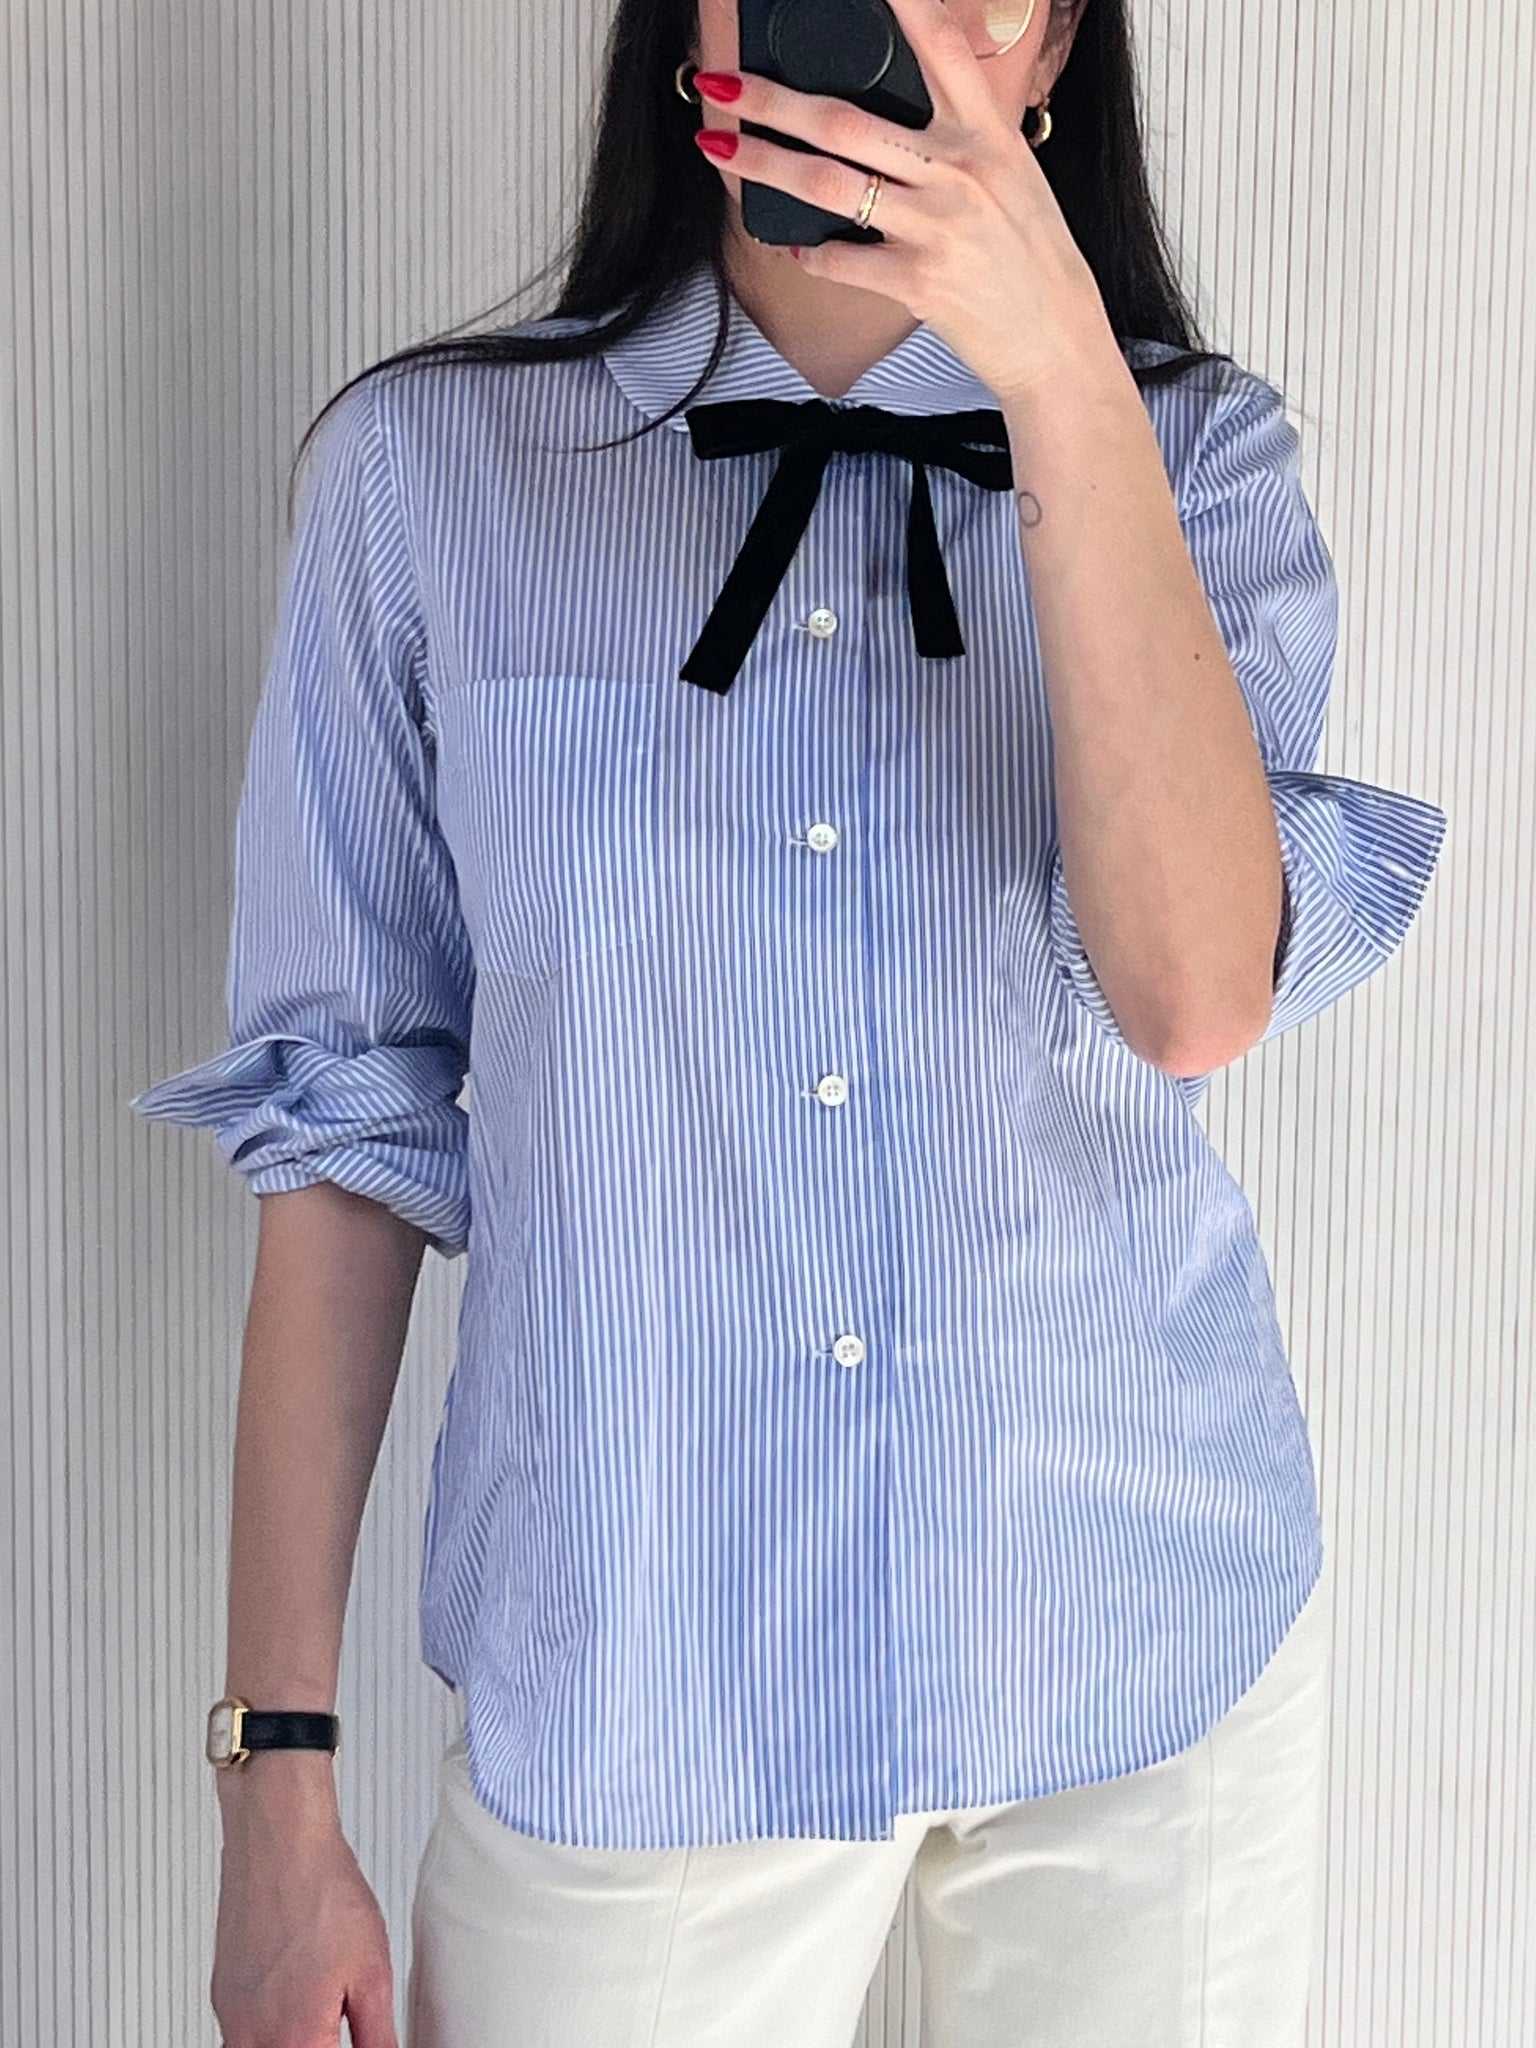 Commes girl button down